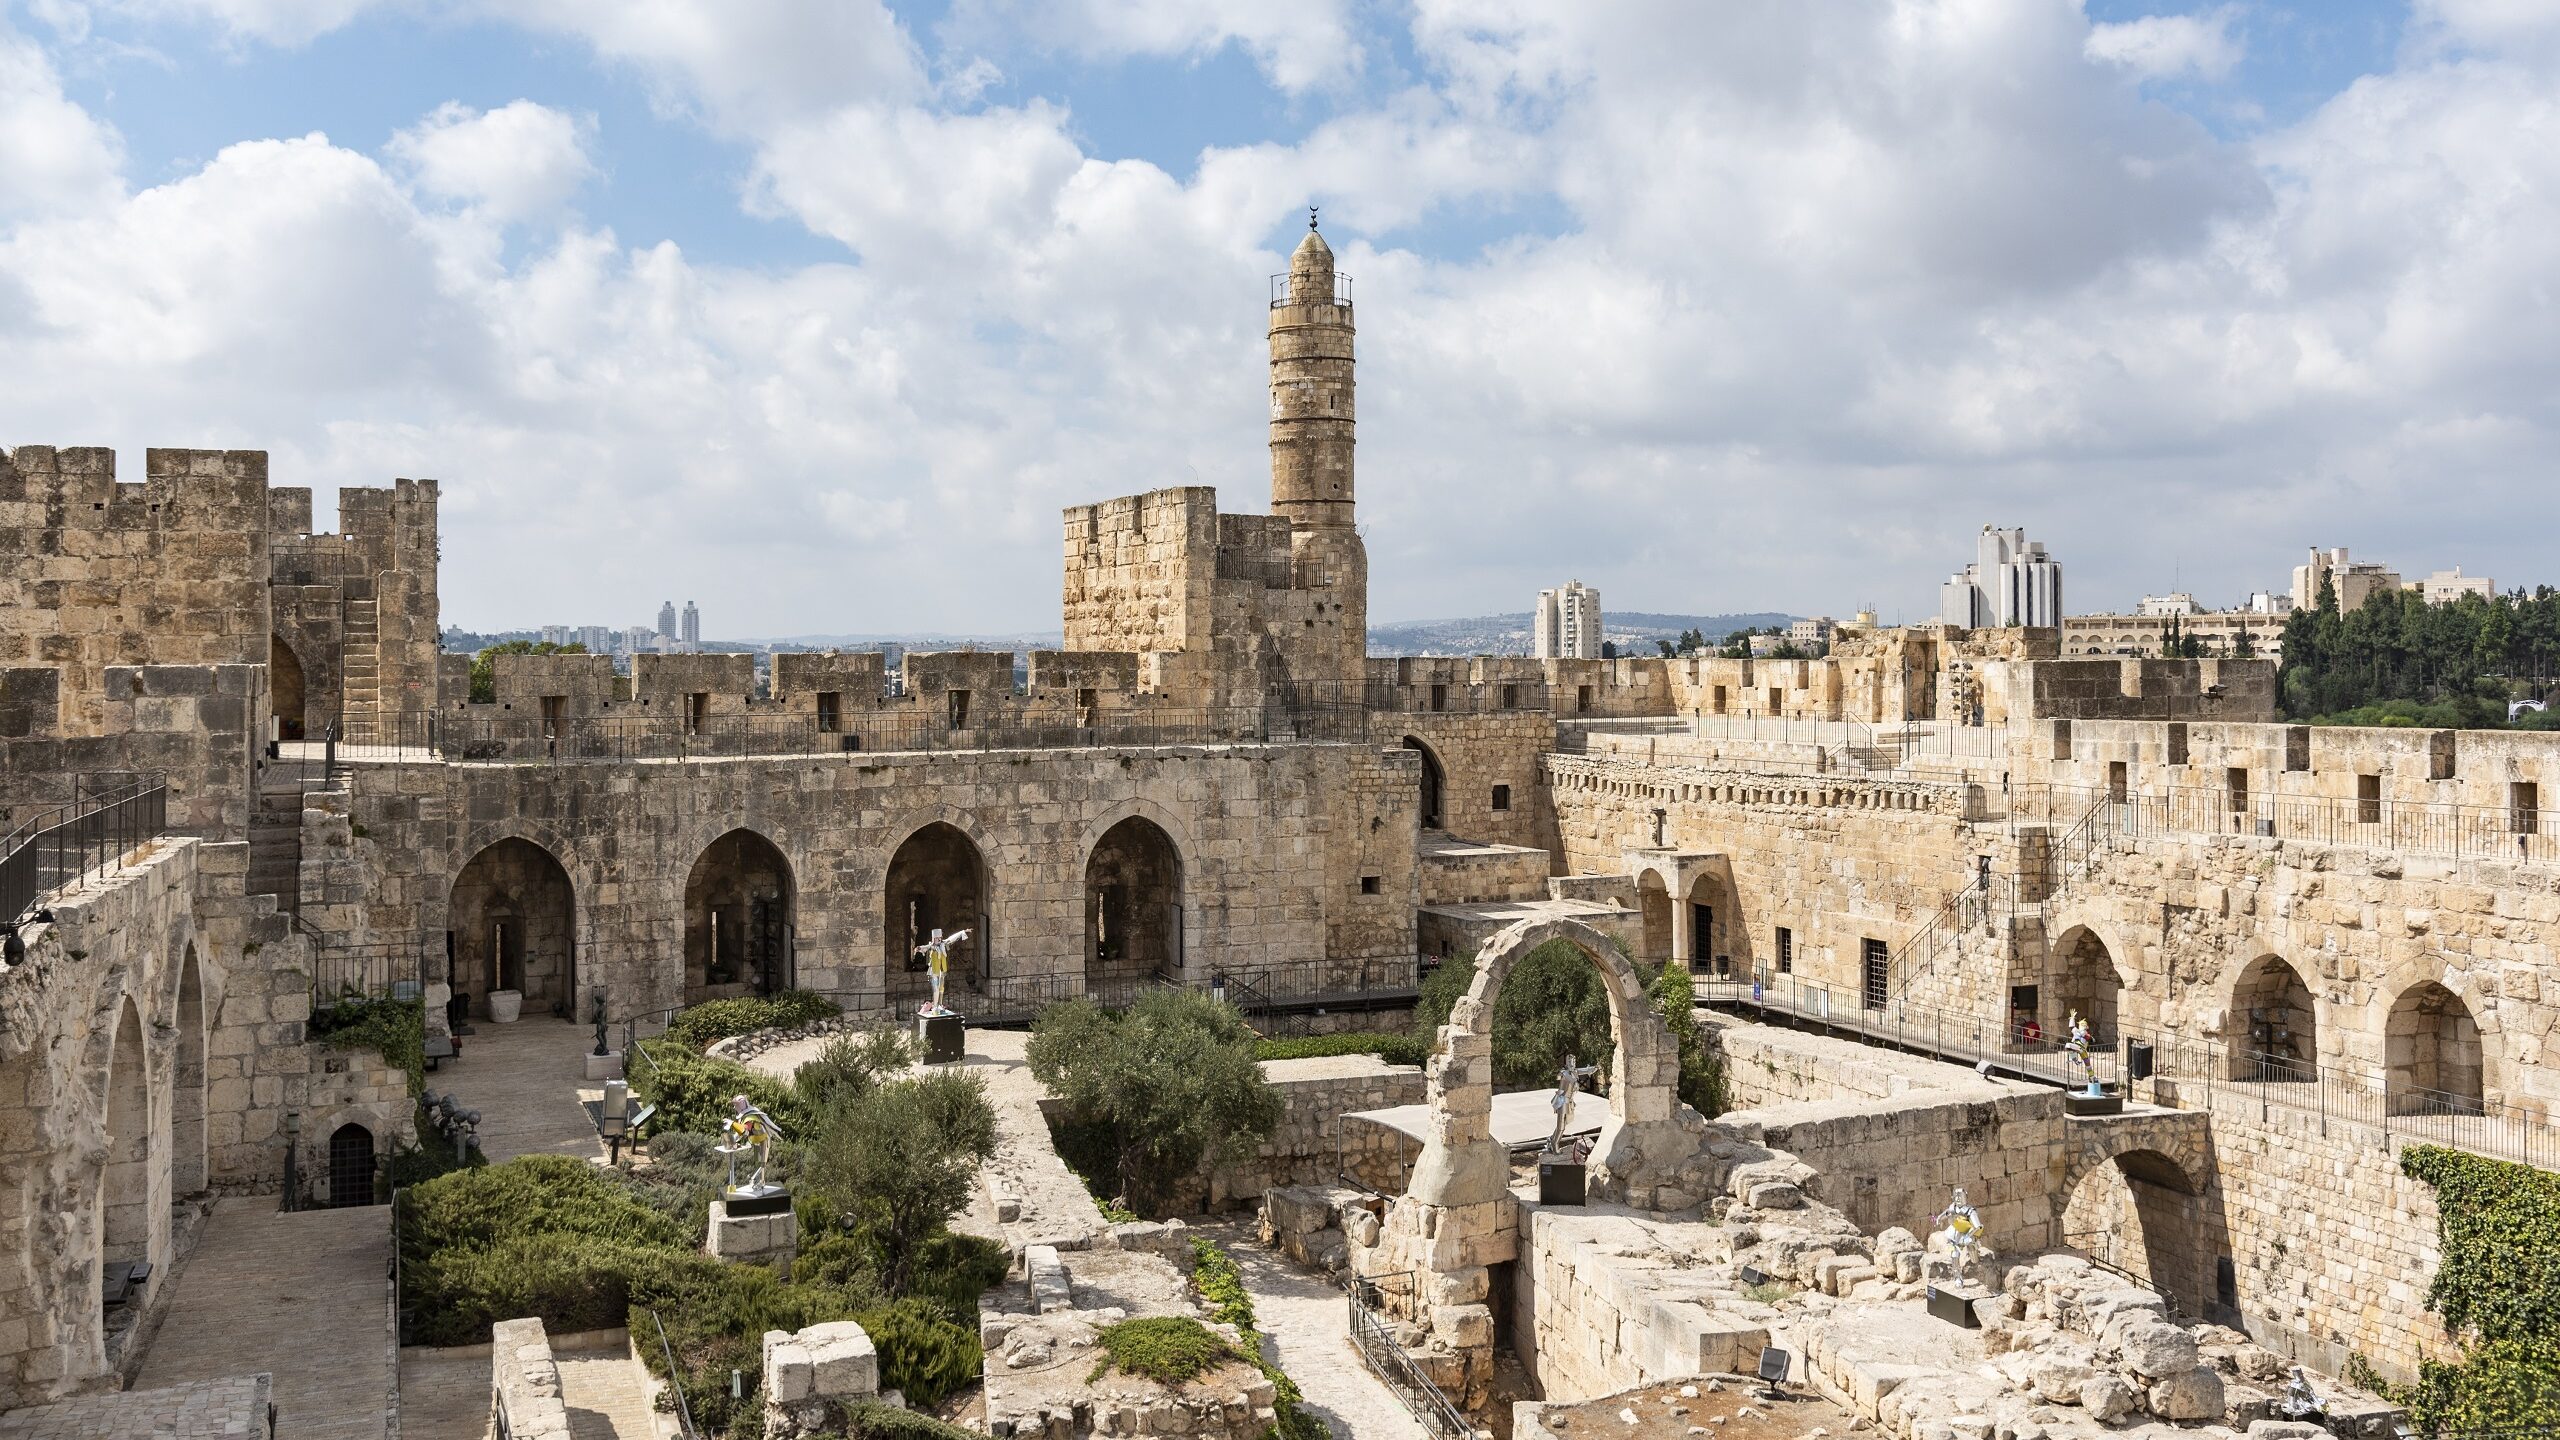 After Massive Renewal Program, Jerusalem’s Tower of David To Reopen as City’s Official Museum